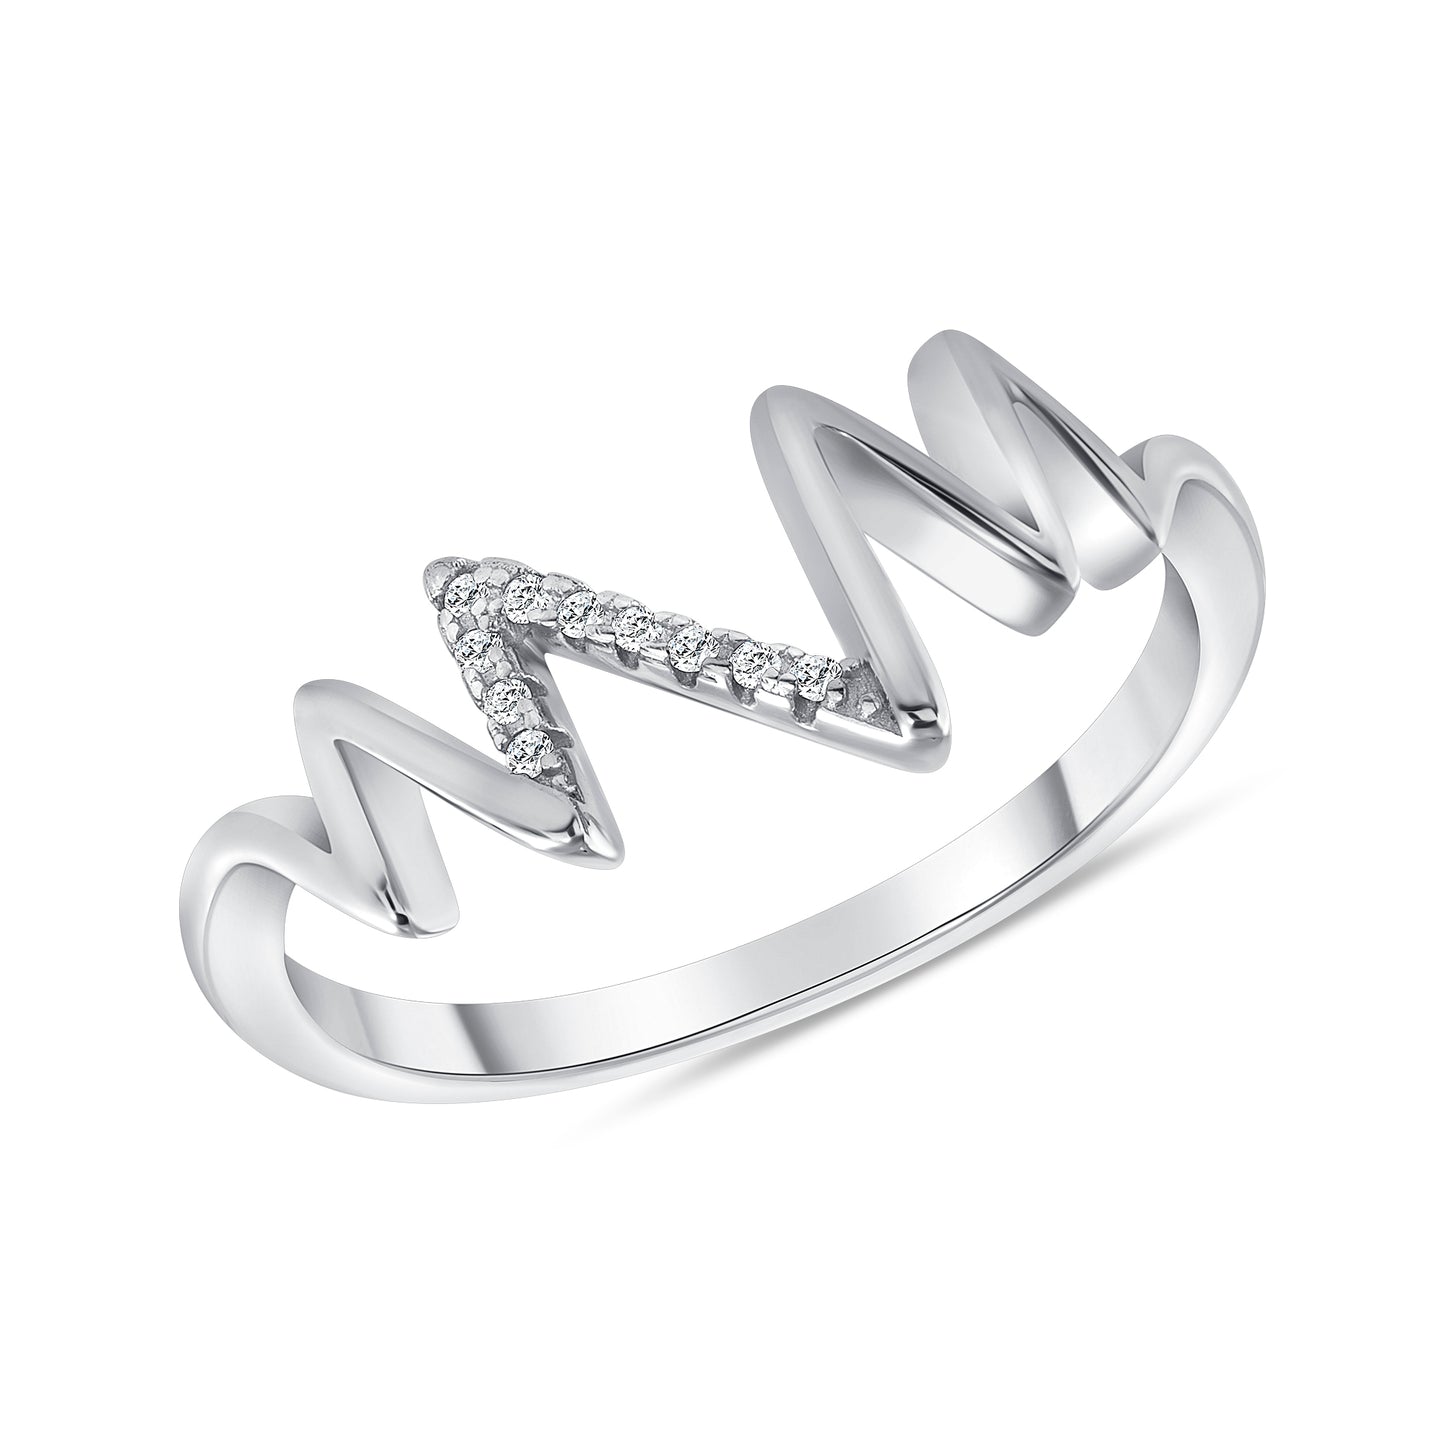 Silver 925 Rhodium Plated Heartbeat Cubic Zirconia Ring. CR00485